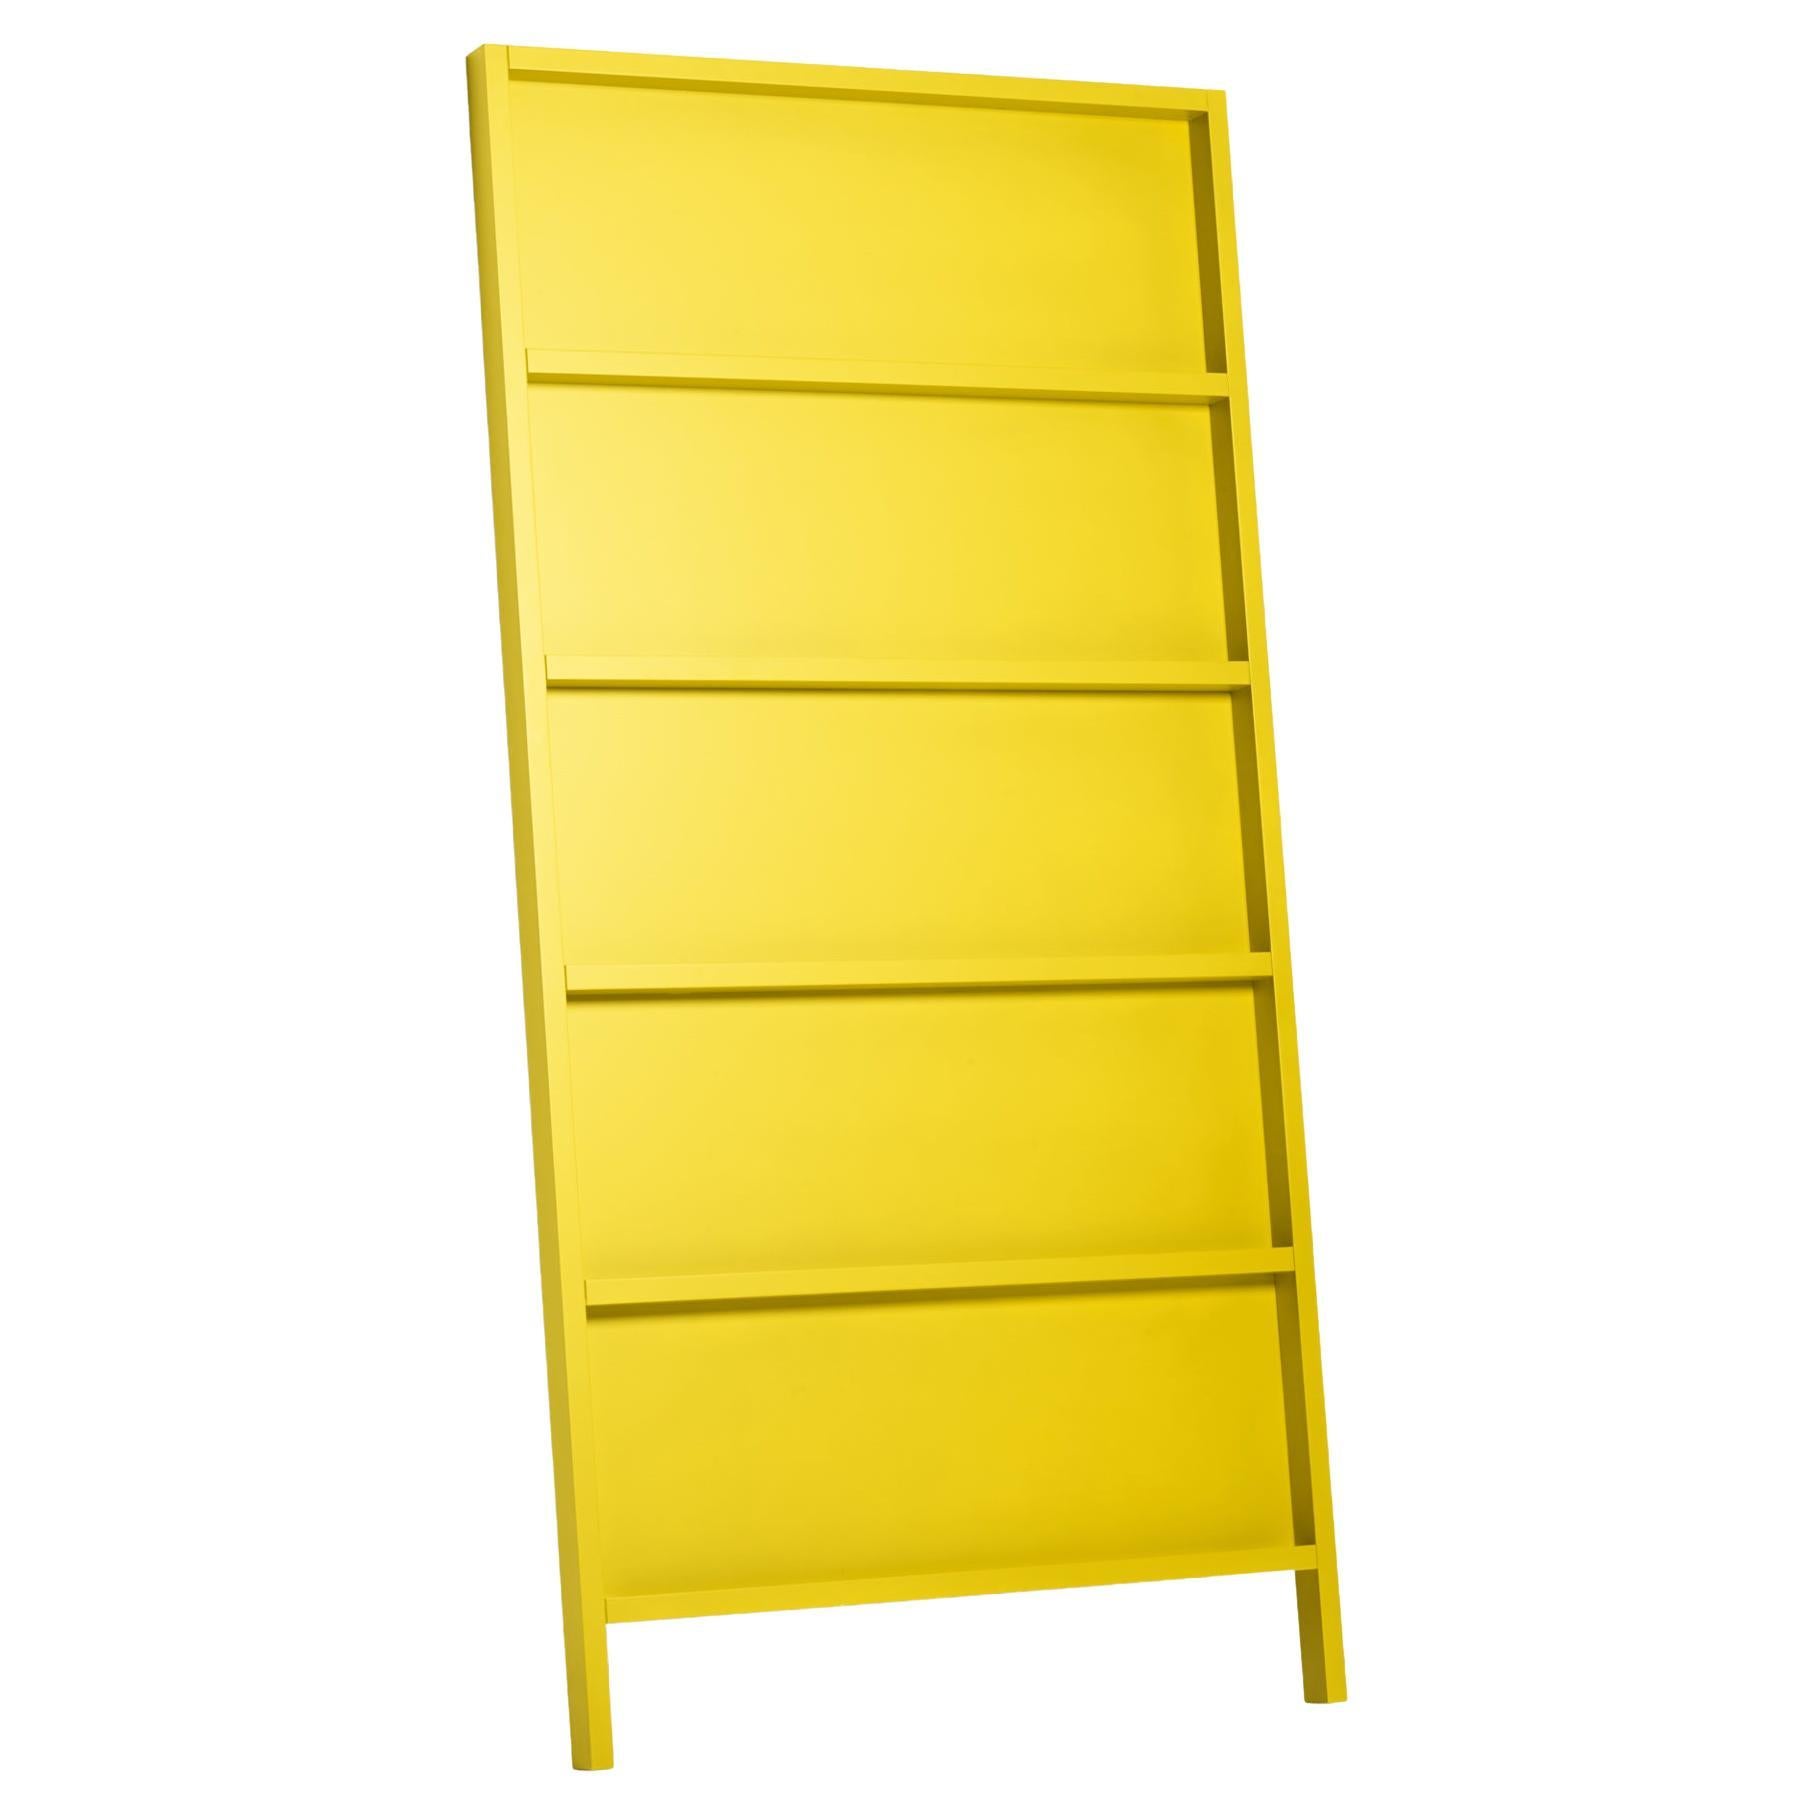 Moooi Oblique Small Cupboard/Wall Shelf in Traffic Yellow Lacquered Beech